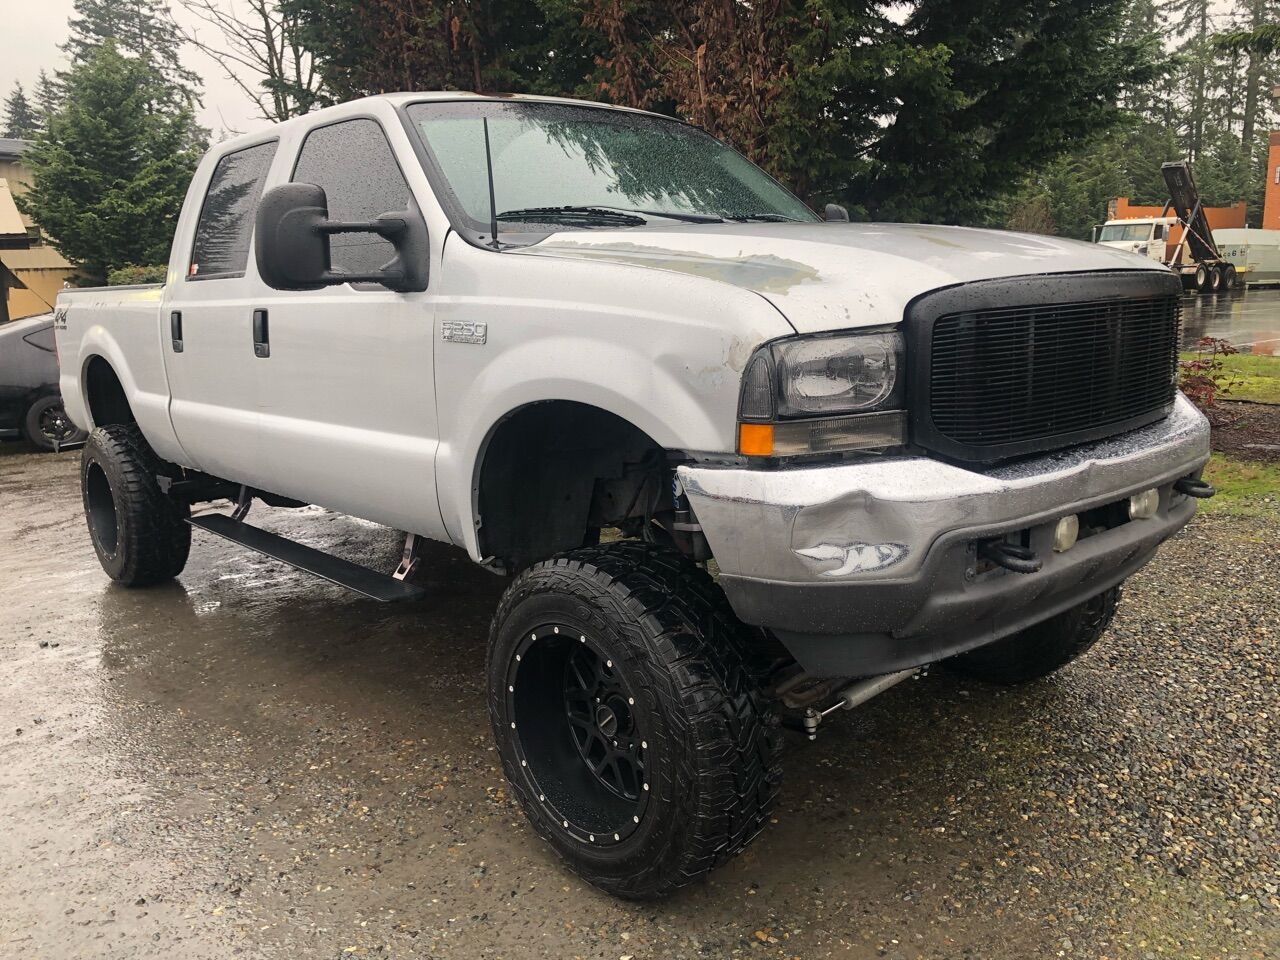 2001 Ford F-250 Super Duty For Sale - Carsforsale.com®